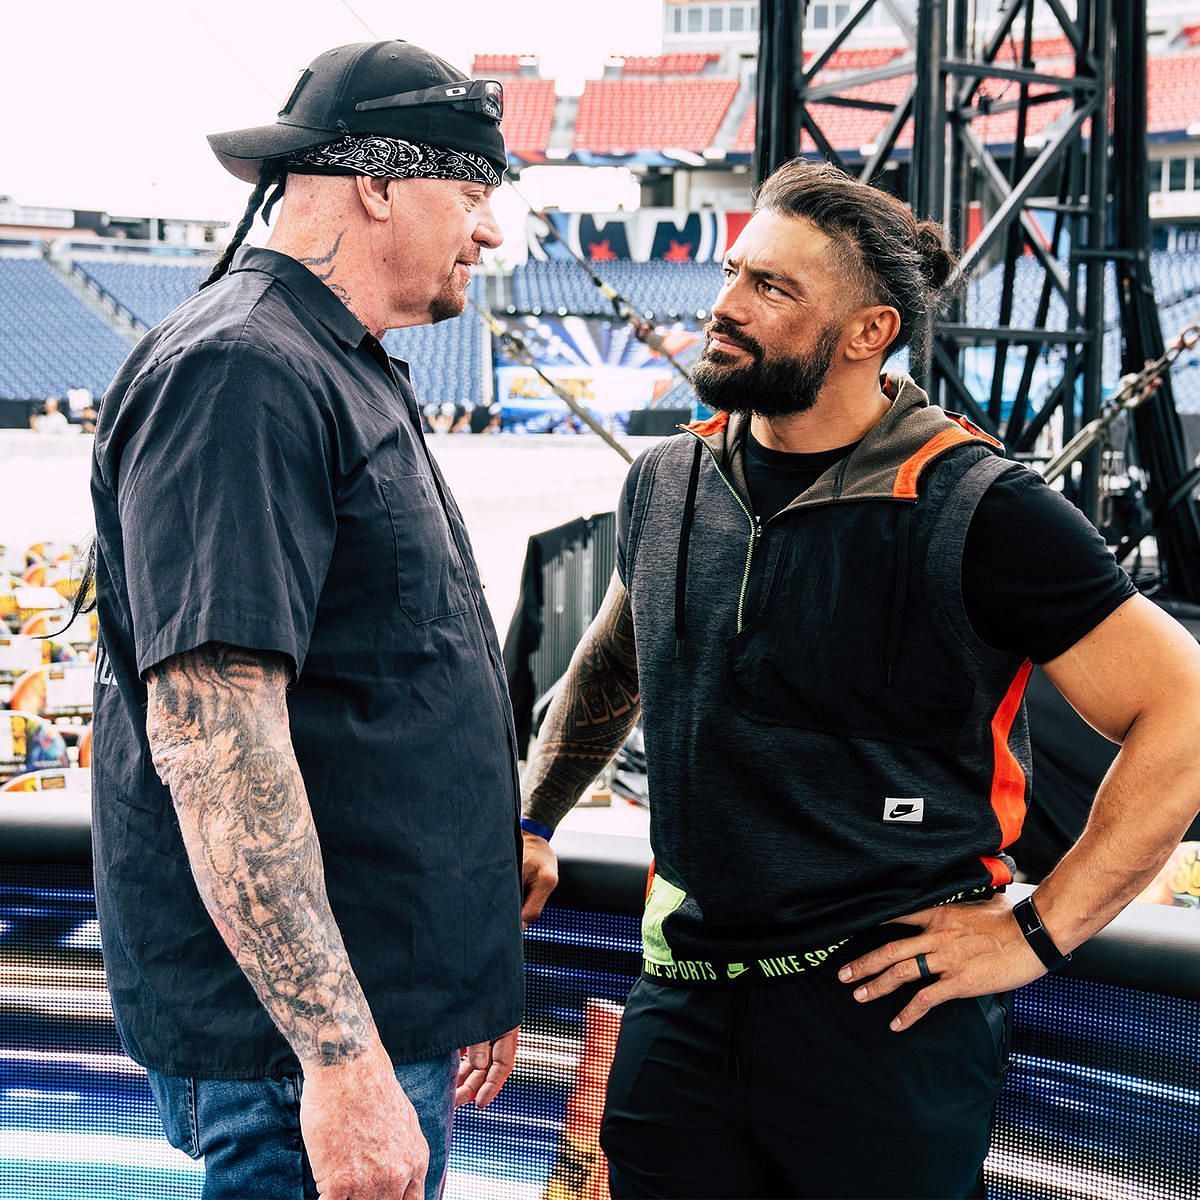 The Undertaker and Roman Reigns